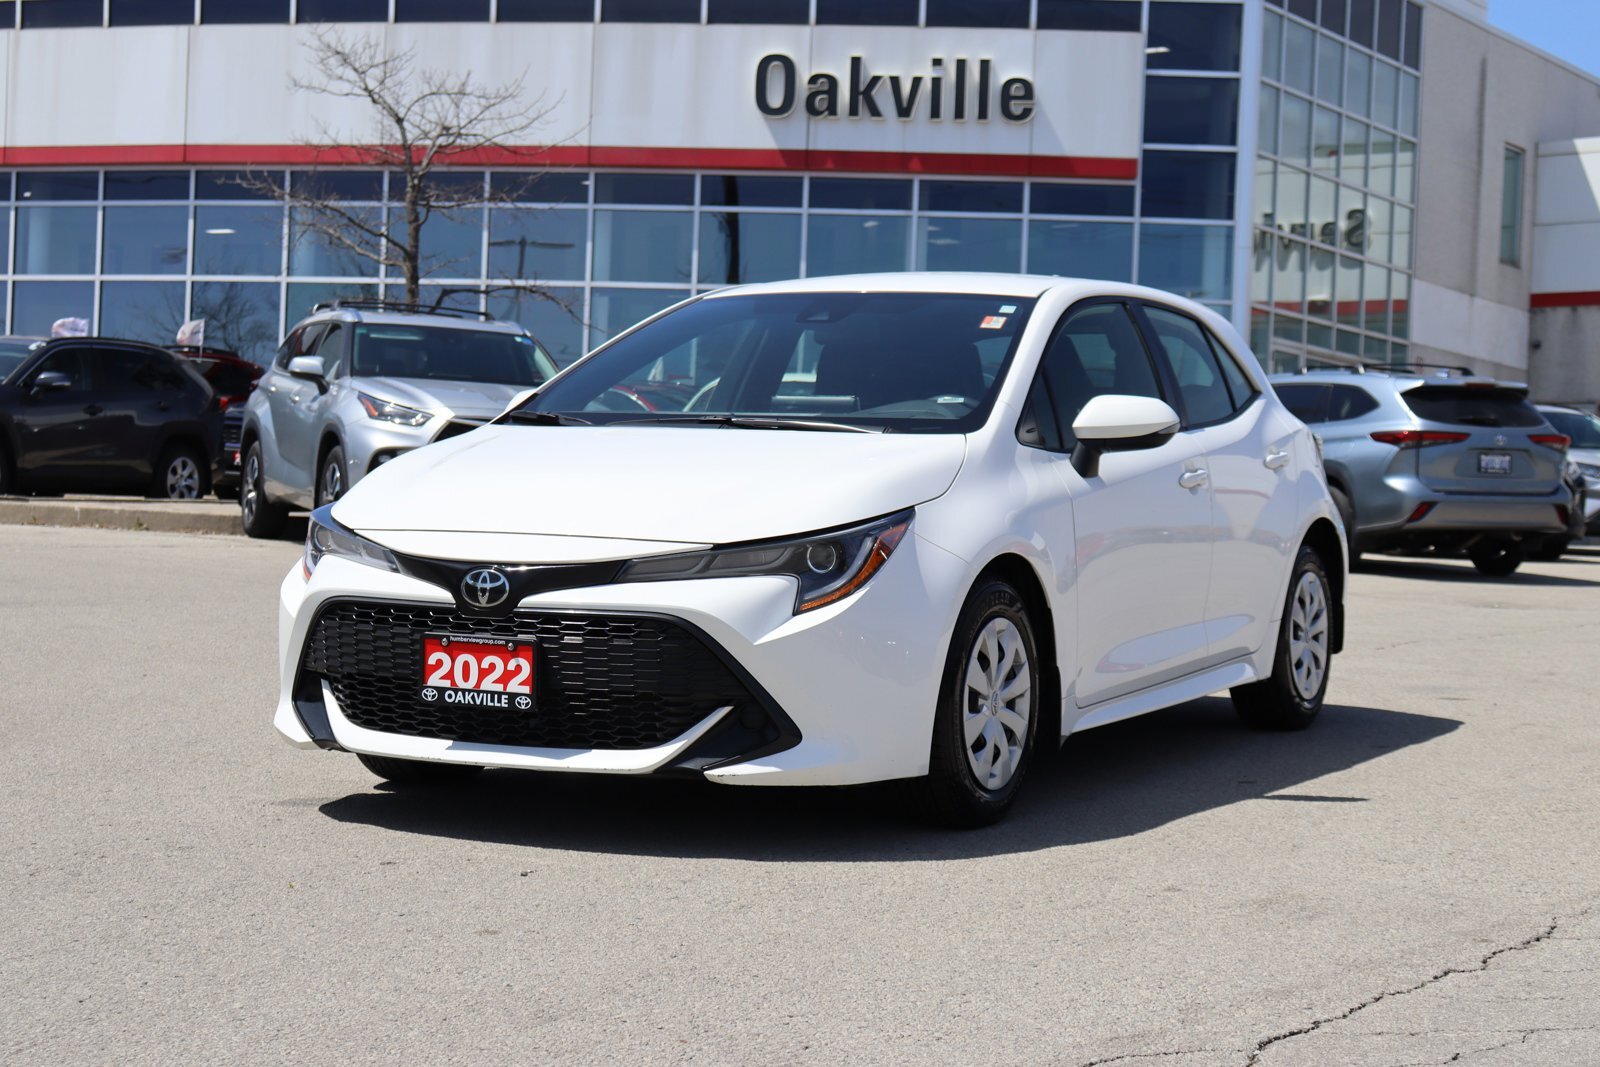 2022 Toyota Corolla Hatchback Clean Carfax | Brakes Serviced